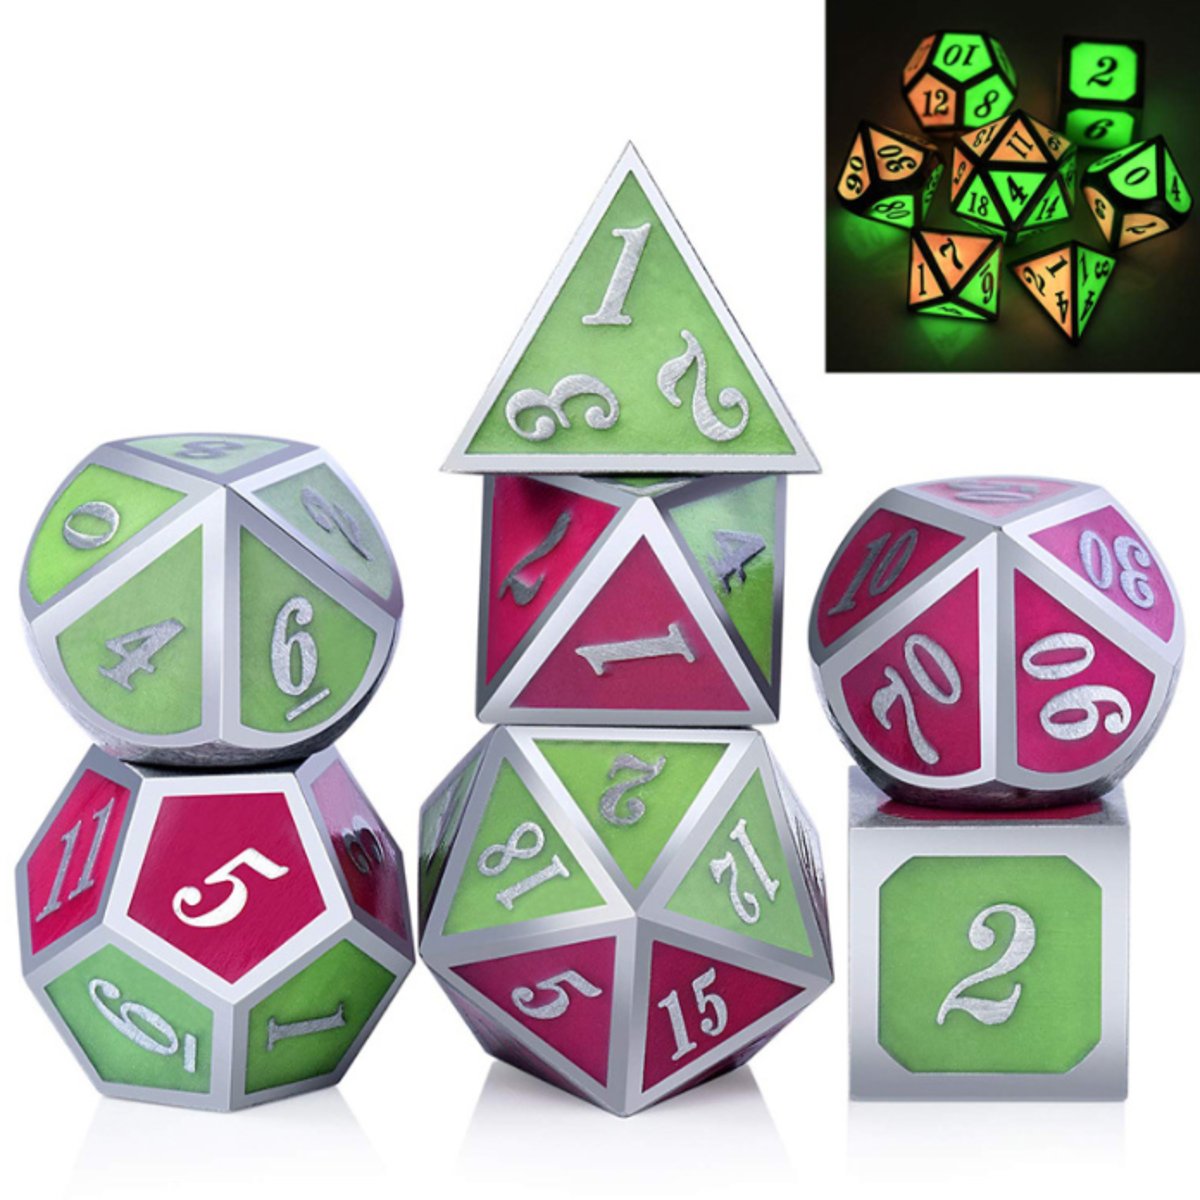 7pcs-Polyhedral-Dice-Zinc-Alloy-Dice-Set-Heavy-Duty-Dices-For-Role-Playing-Game-Dice-Set-1590750-5